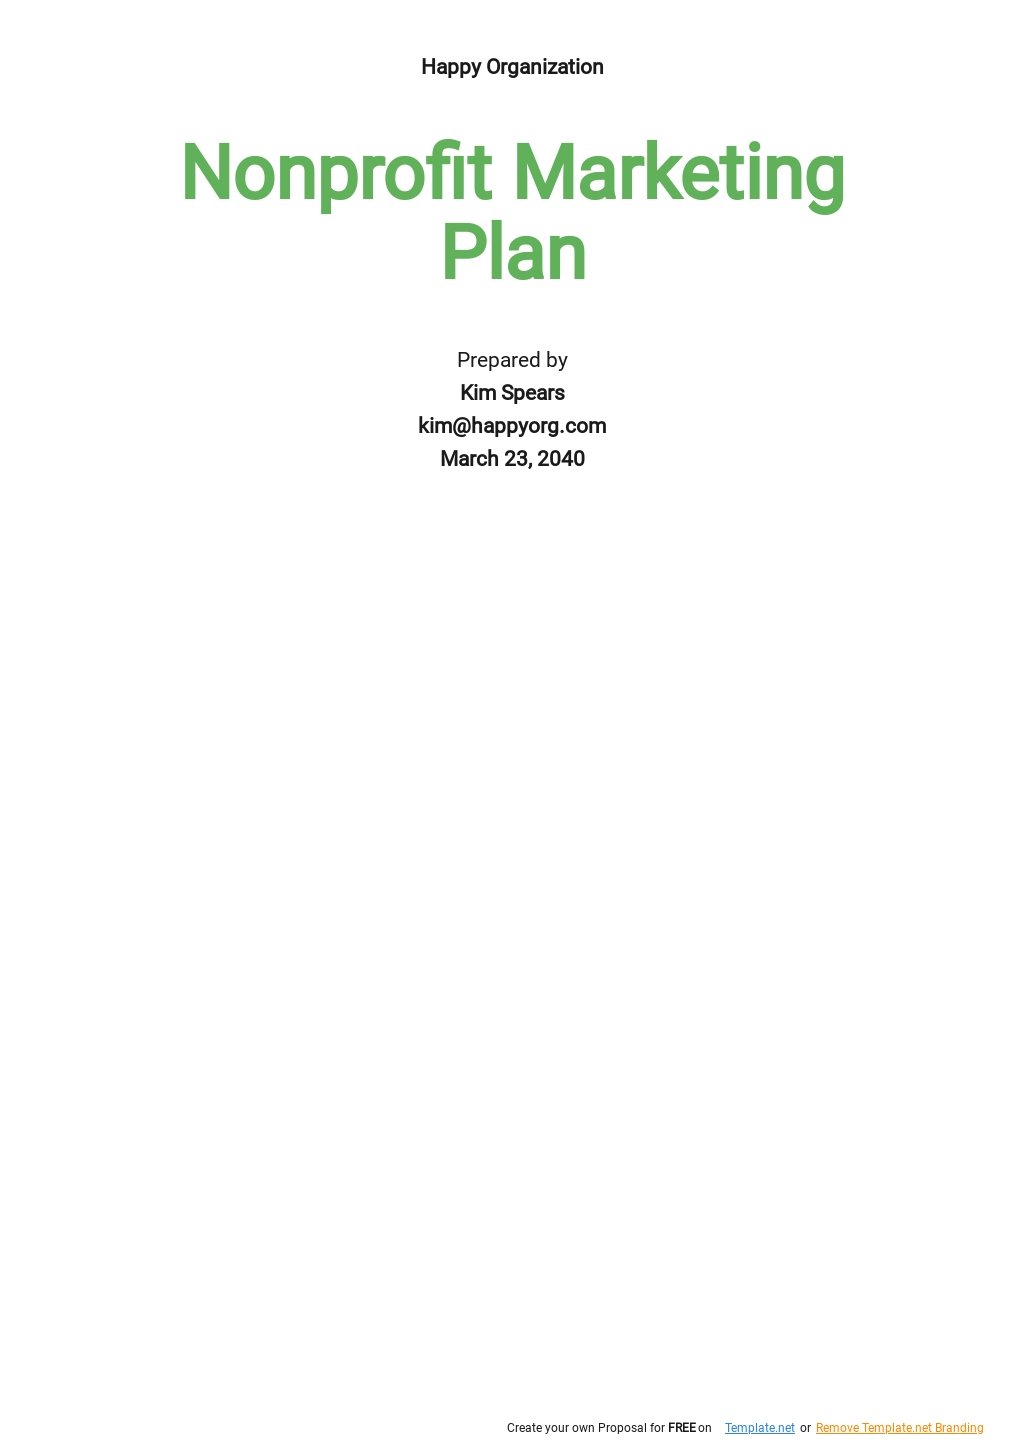 free-marketing-plan-word-templates-217-download-template